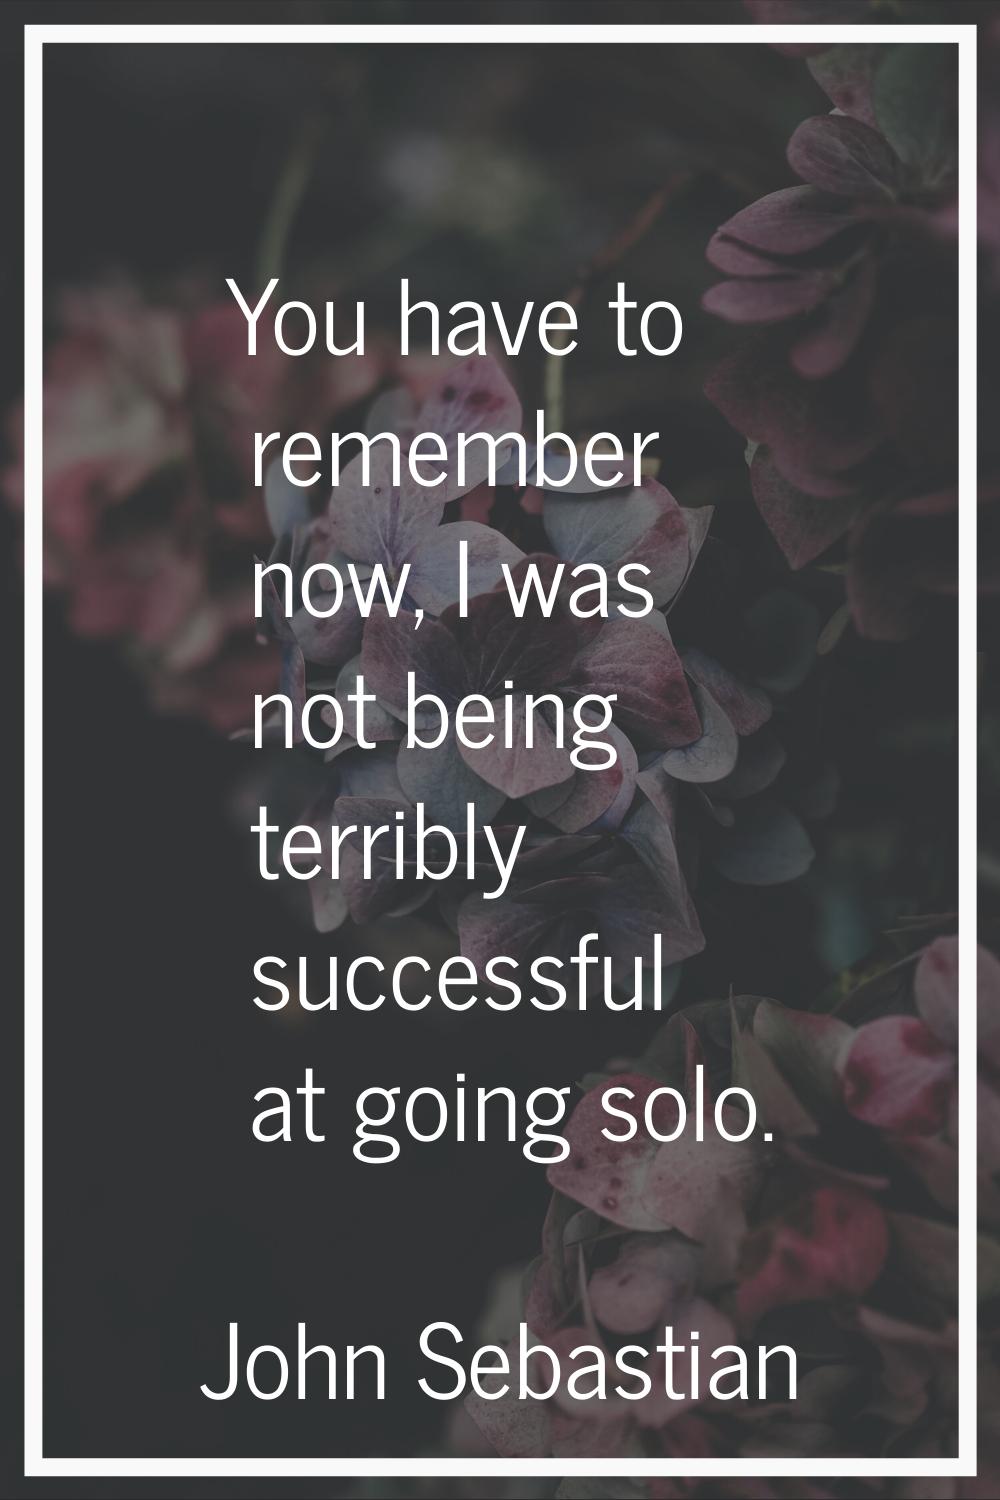 You have to remember now, I was not being terribly successful at going solo.